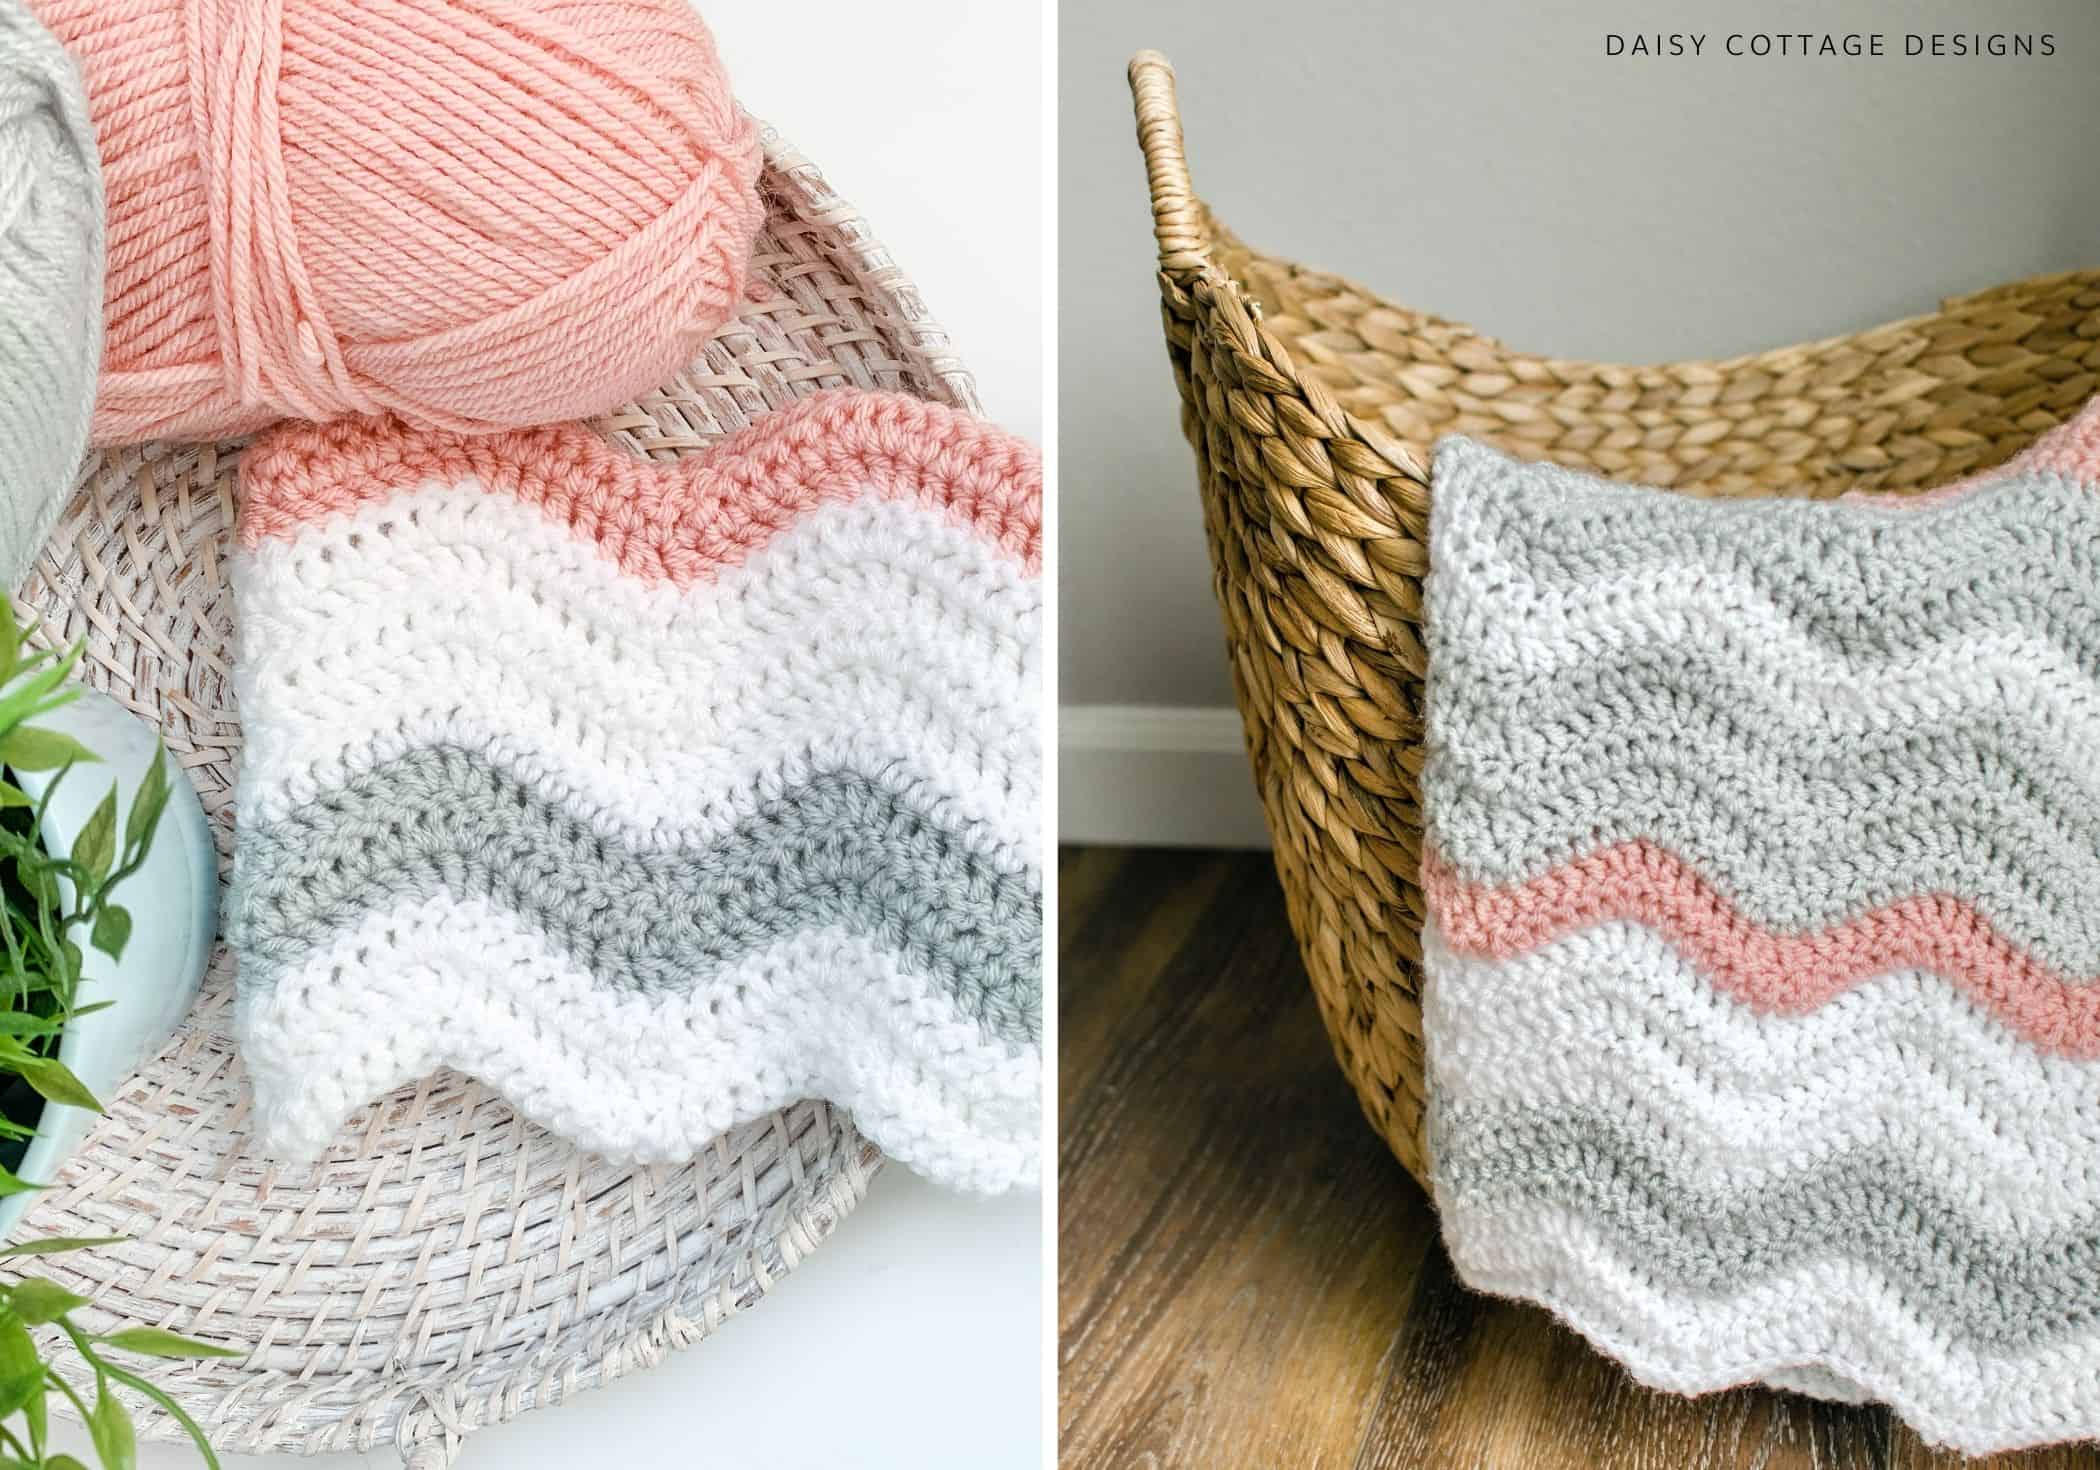 Pink, white, and gray crochet blanket